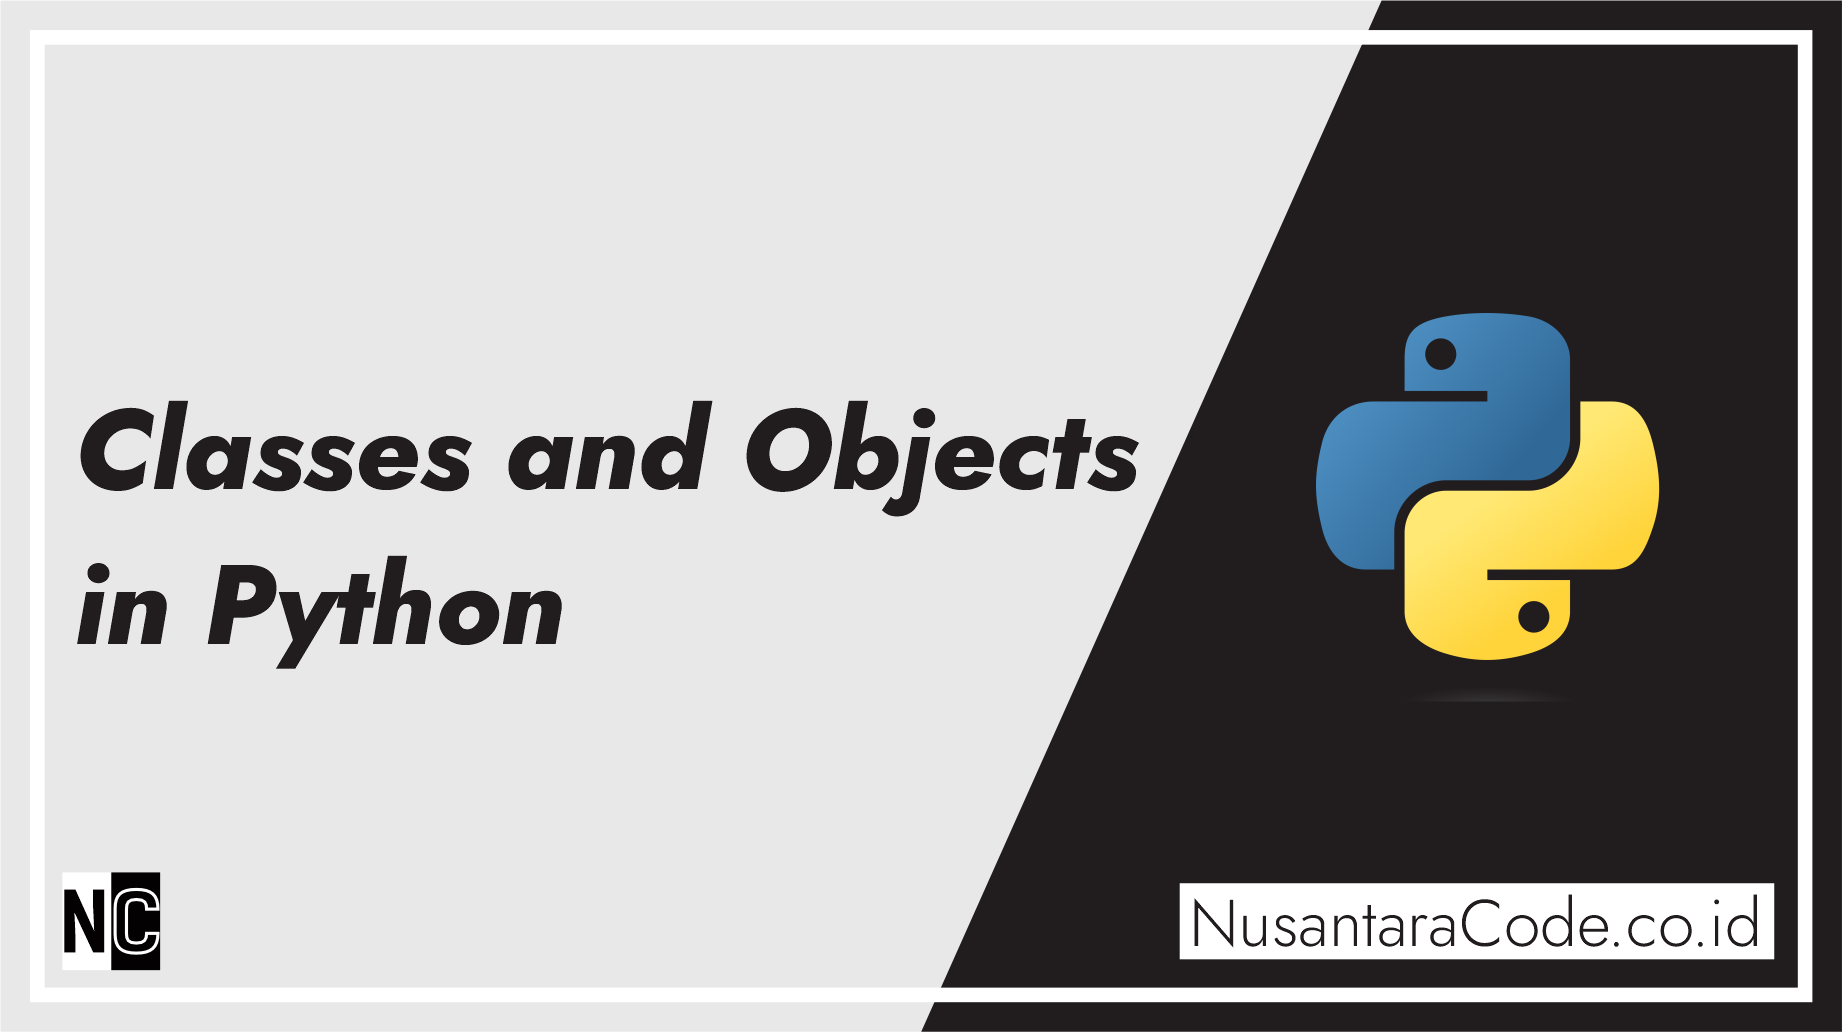 Classes and Objects in Python